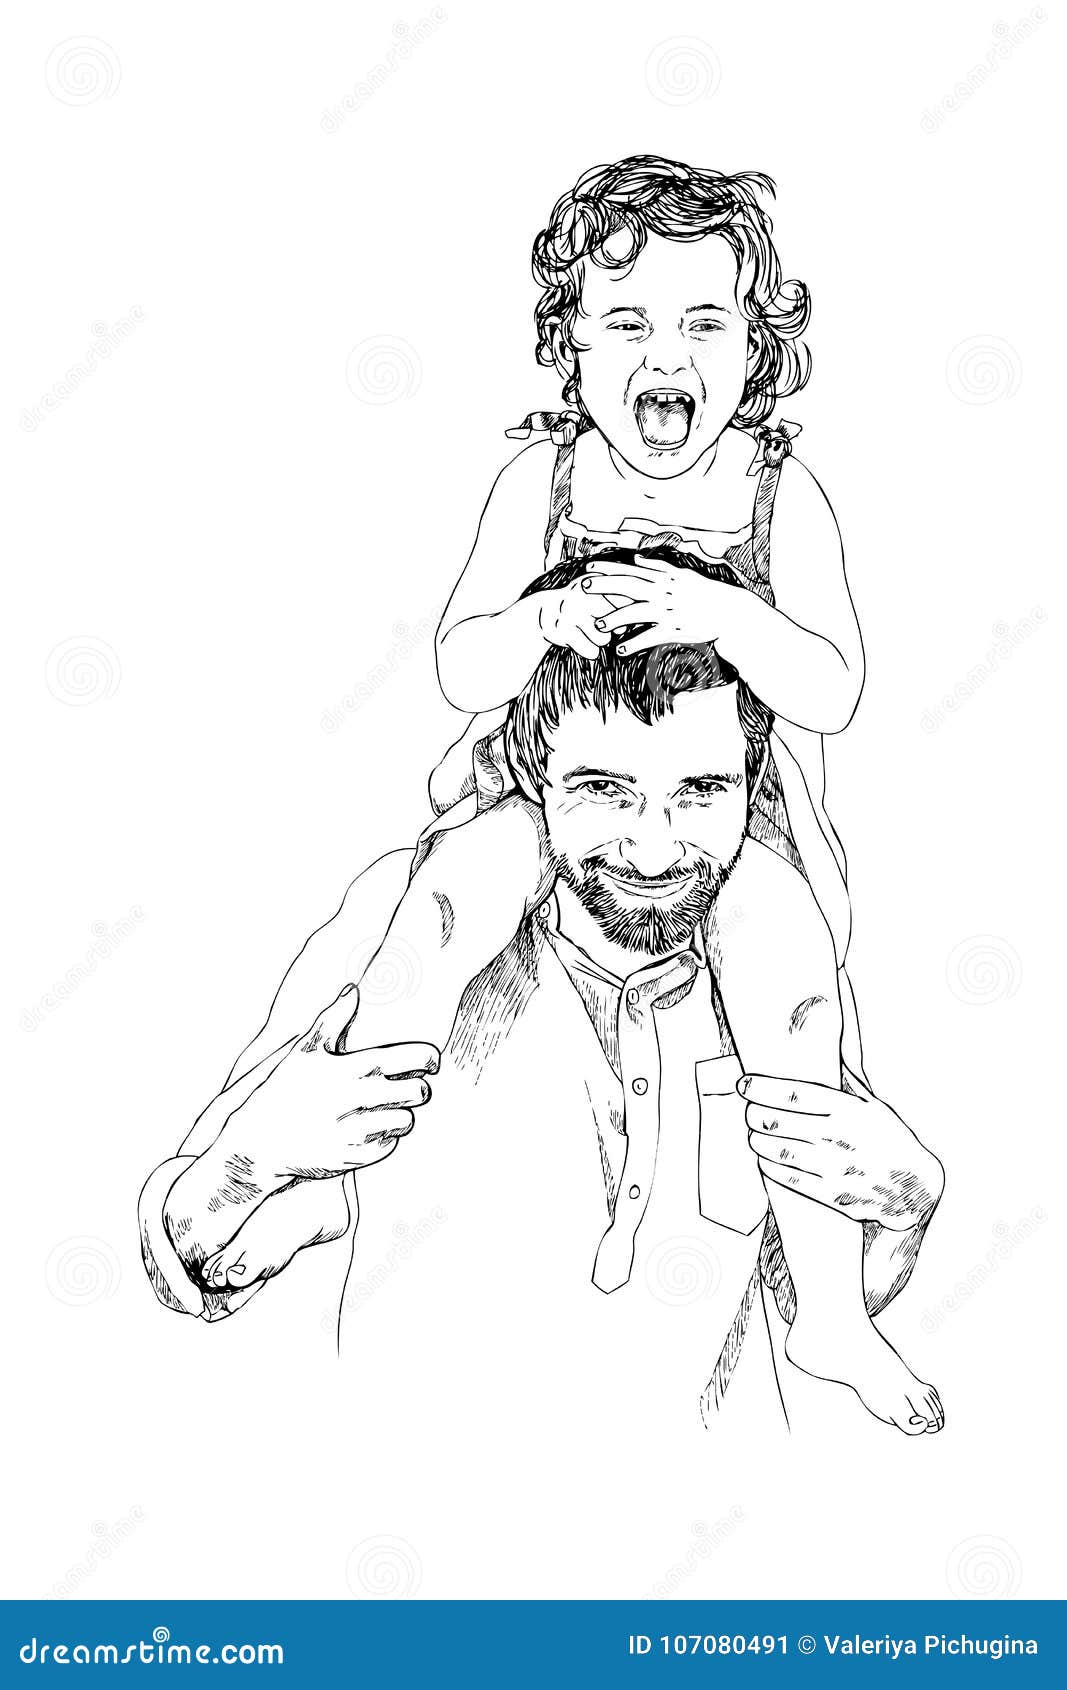 10,846 Father Son Sketch Images, Stock Photos & Vectors | Shutterstock